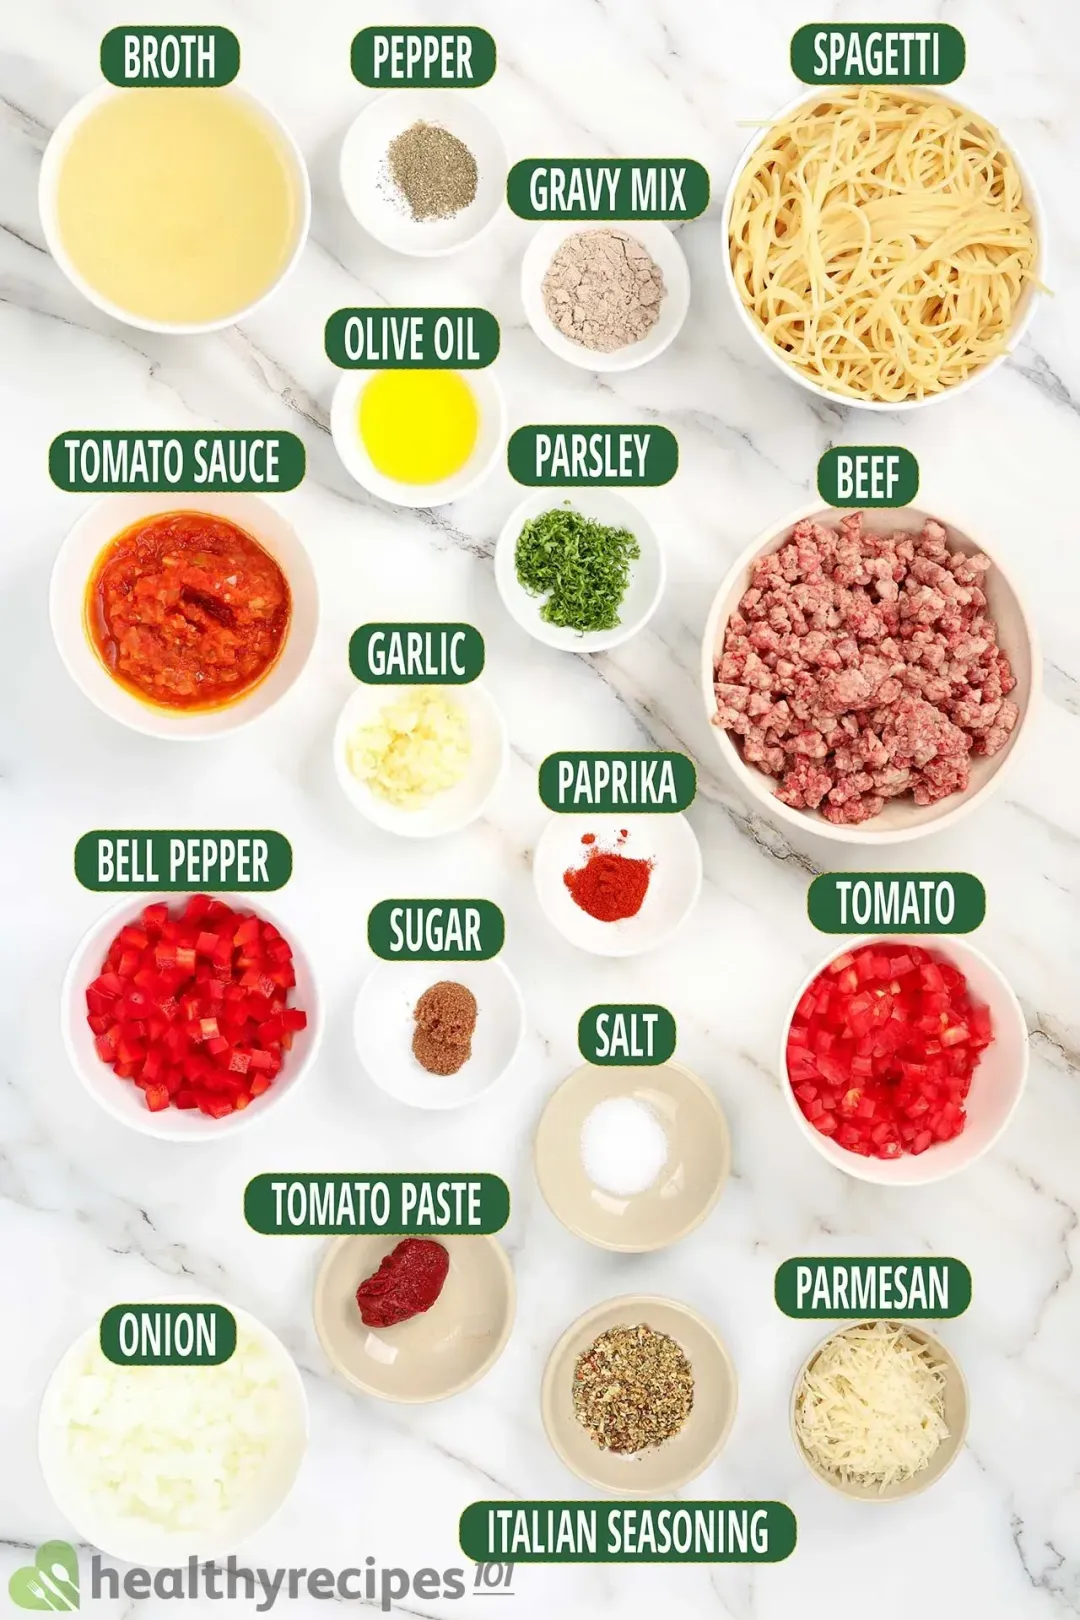 Spaghetti Bolognese Recipe: An Easy and Classic Dinner